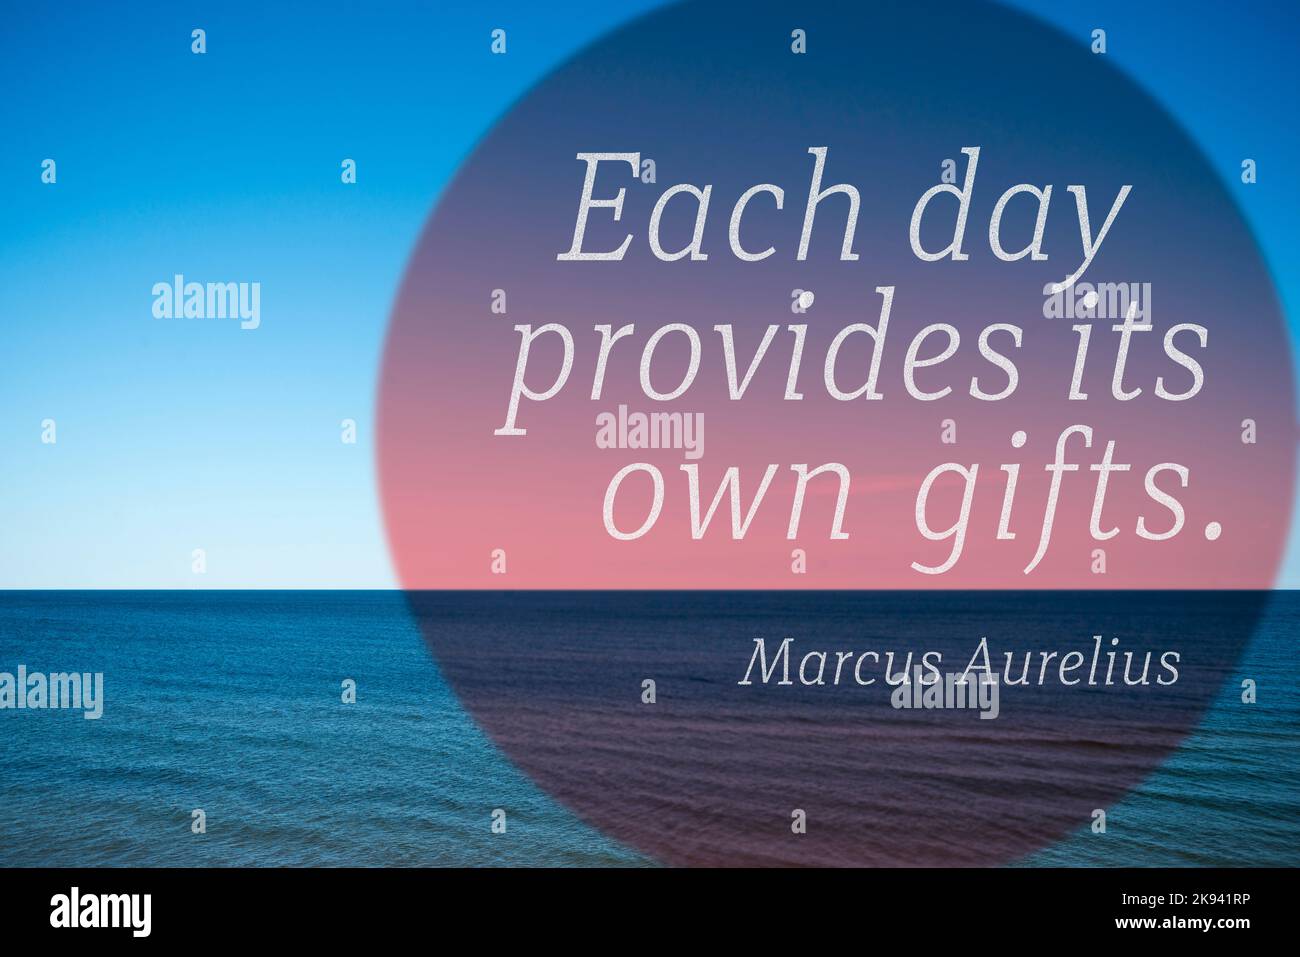 Each day provides its own gifts - quote of ancient Roman emperor and philosopher Marcus Aurelius printed over photo with calm sea landscape Stock Photo